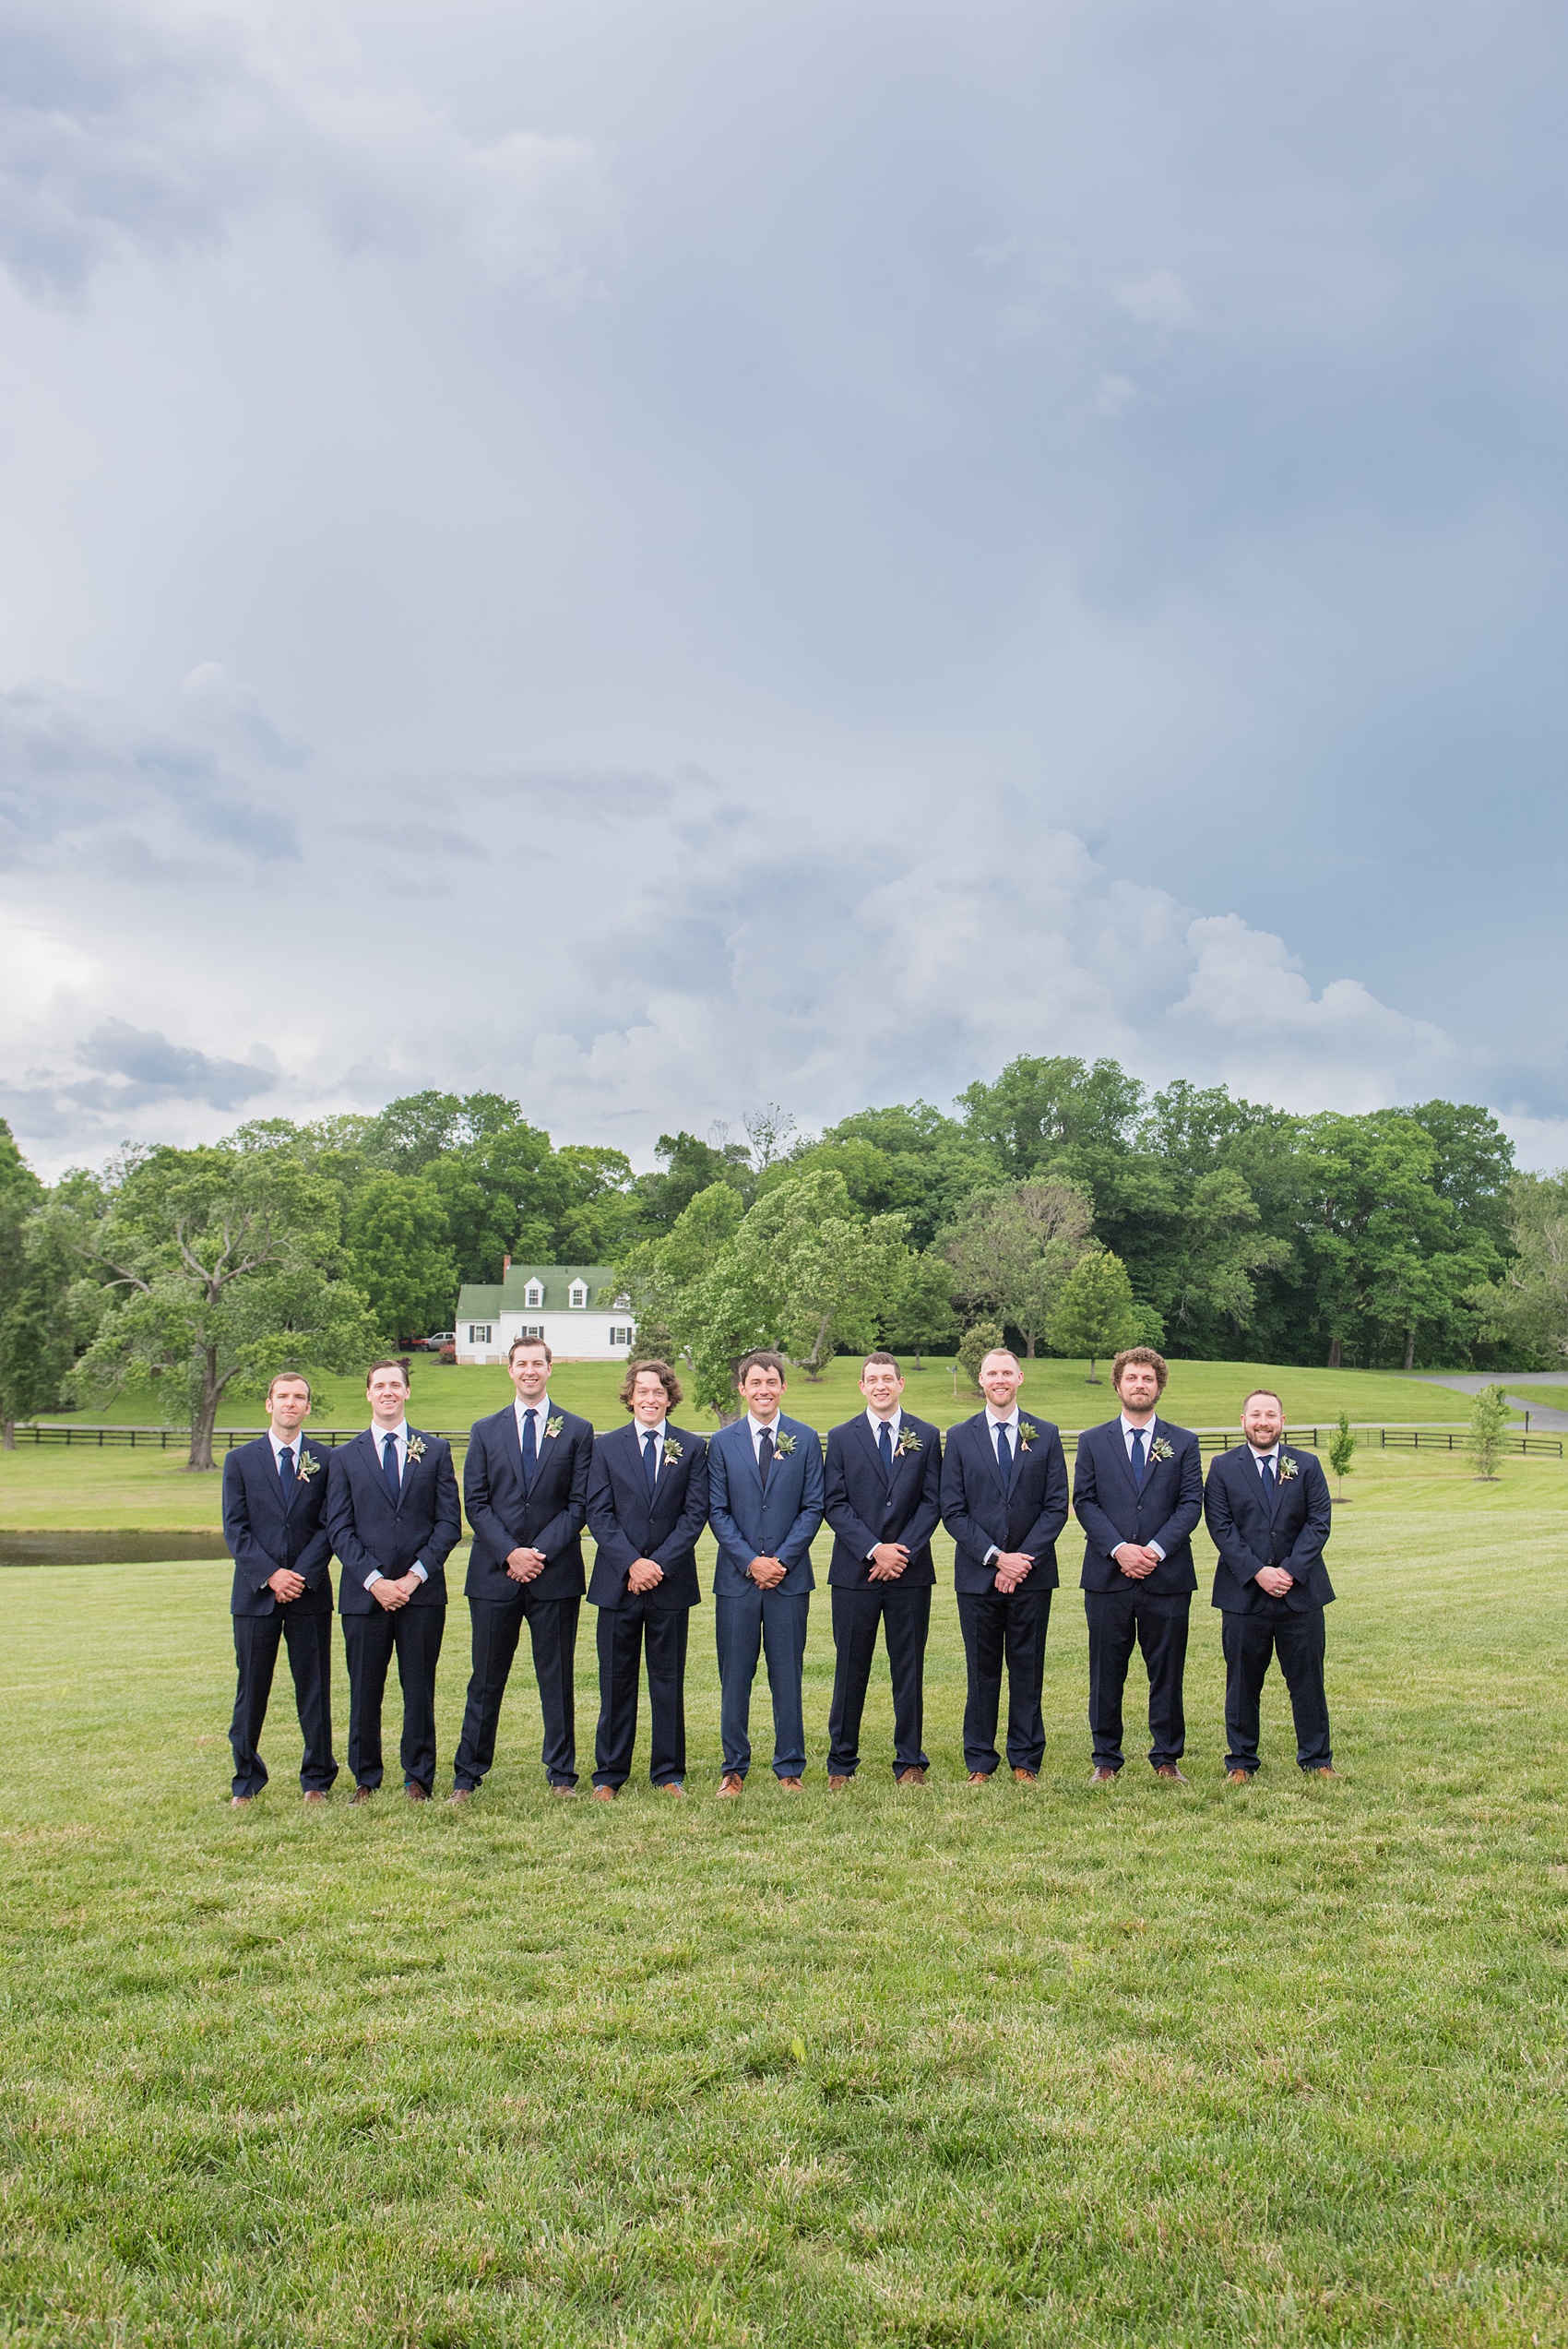 Charlottesville wedding photos by Mikkel Paige Photography at the Lodge at Mount Ida Farm. This Virginia venue is perfect for brides and grooms looking for a beautiful farm reception space. It’s green, romantic, and easy to dress up with flowers or keep simple! The groomsmen wore navy blue suits, succulent boutonnieres, and bridesmaids wore mismatched mint green gowns with colorful bouquets. Click through for the complete post from this May event! Planning and design by @vivalevent and flowers by @apassarelli of Meristem Floral. #Charlottesville #mountidafarm #lodgeatmountida #CharlottesvilleVA #CharlottesvilleVirginia #Charlottesvillewedding #Charlottesvilleweddingphotographer #mikkelpaige #MeristemFloral #VivaLEvent